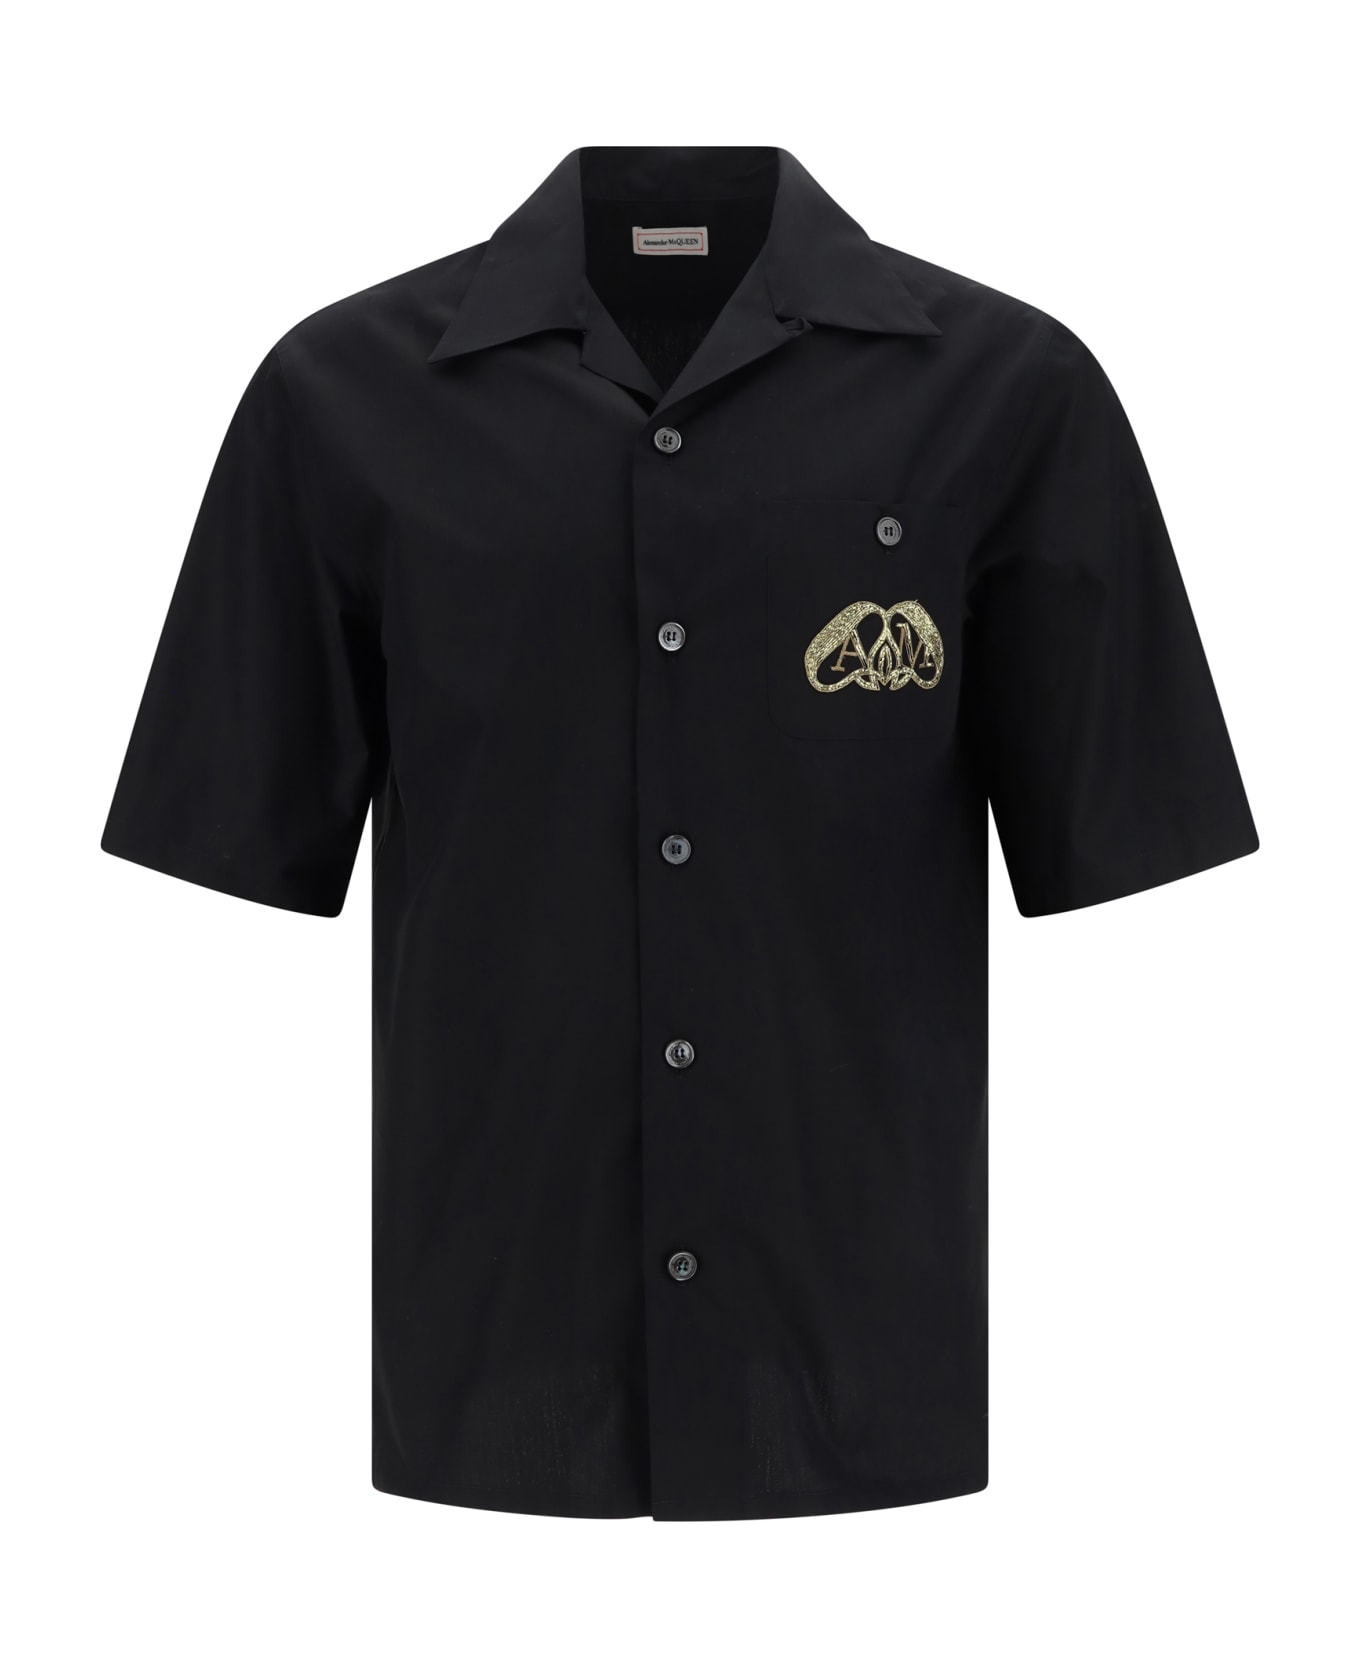 Alexander McQueen The Seal Embellished Buttoned Shirt - Black シャツ